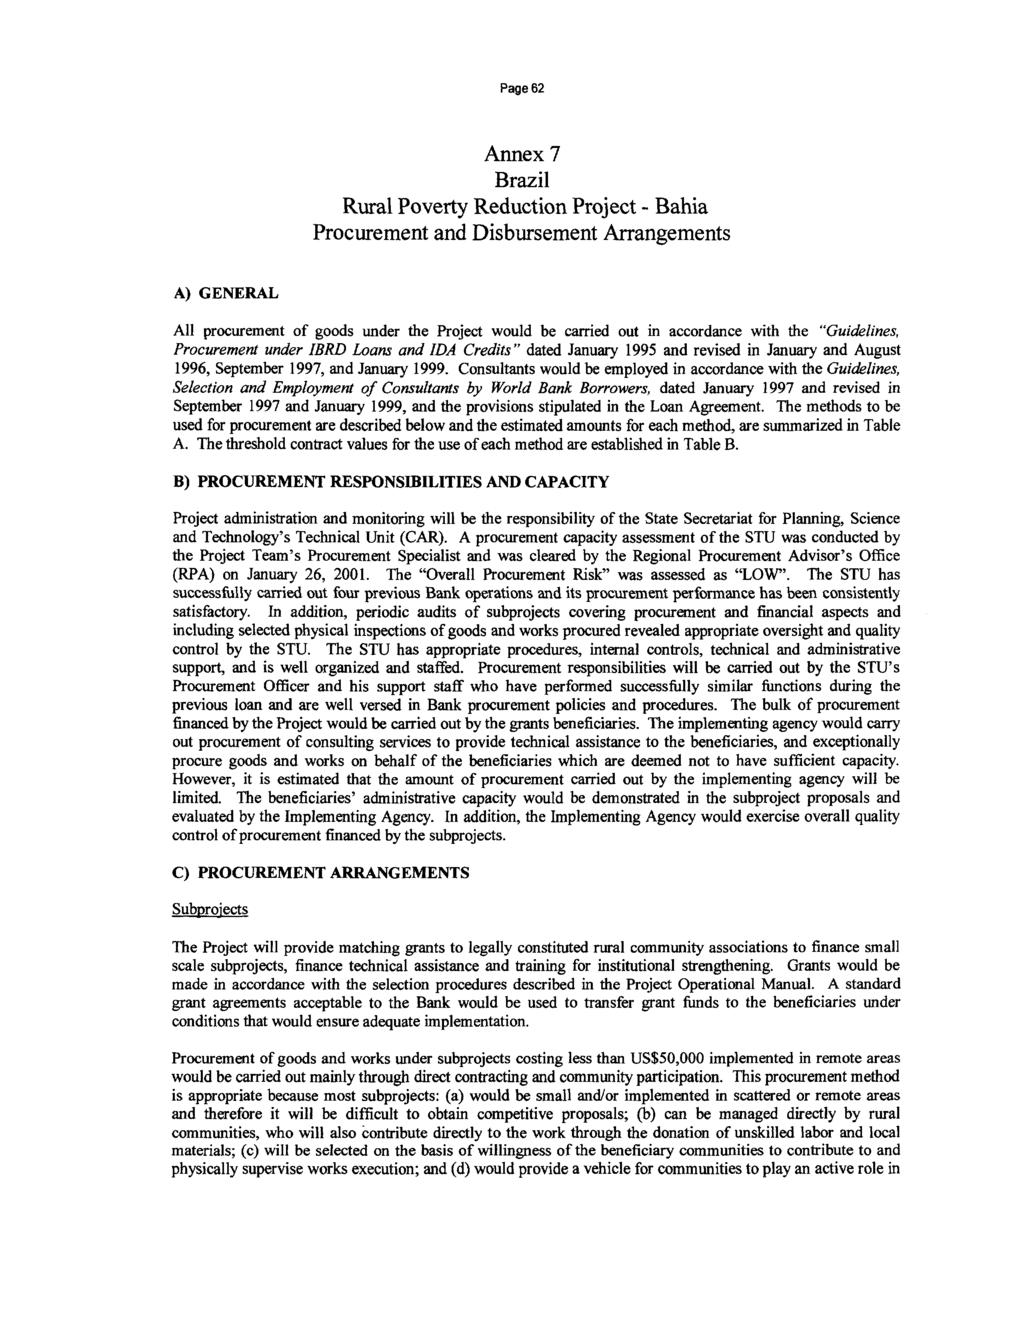 Page 62 Annex 7 Brazil Rural Poverty Reduction Project - Bahia Procurement and Disbursement Arrangements A) GENERAL All procurement of goods under the Project would be carried out in accordance with